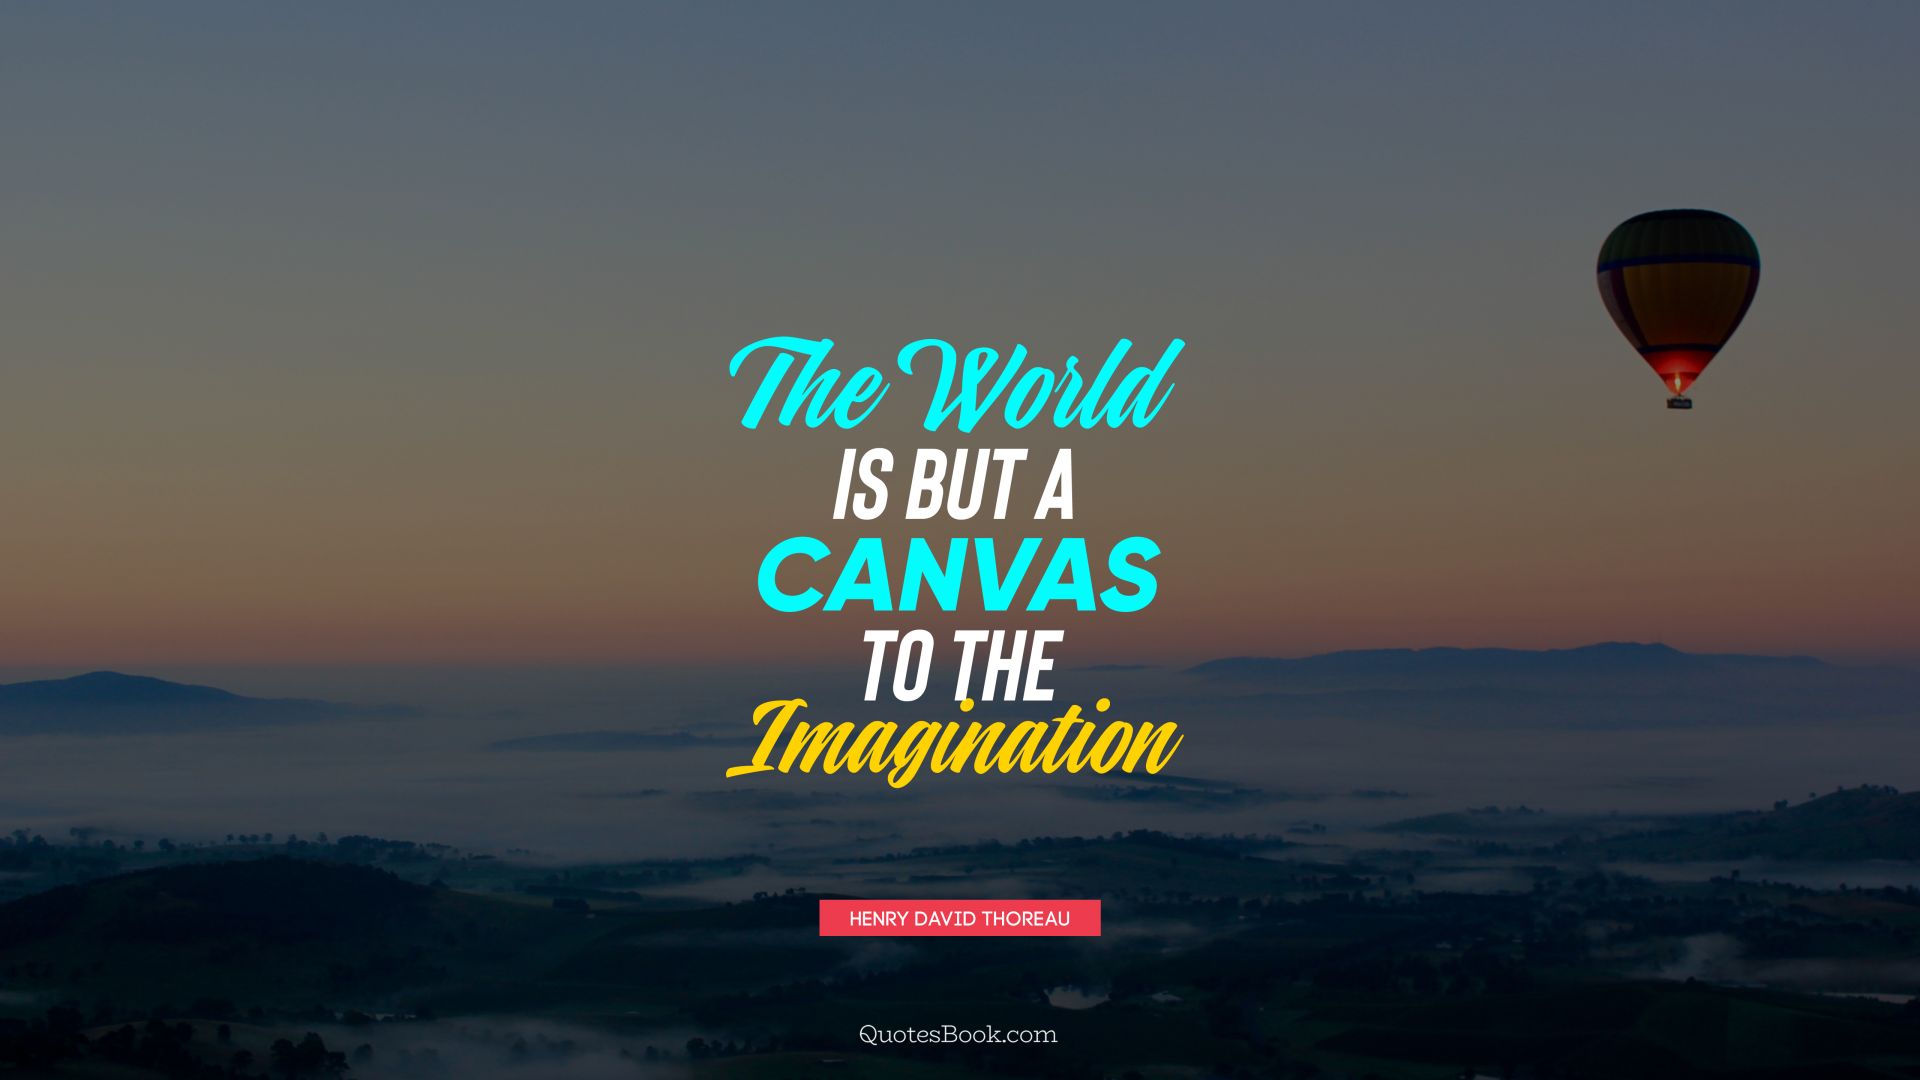 The world is but a canvas to the imagination. - Quote by Henry David Thoreau